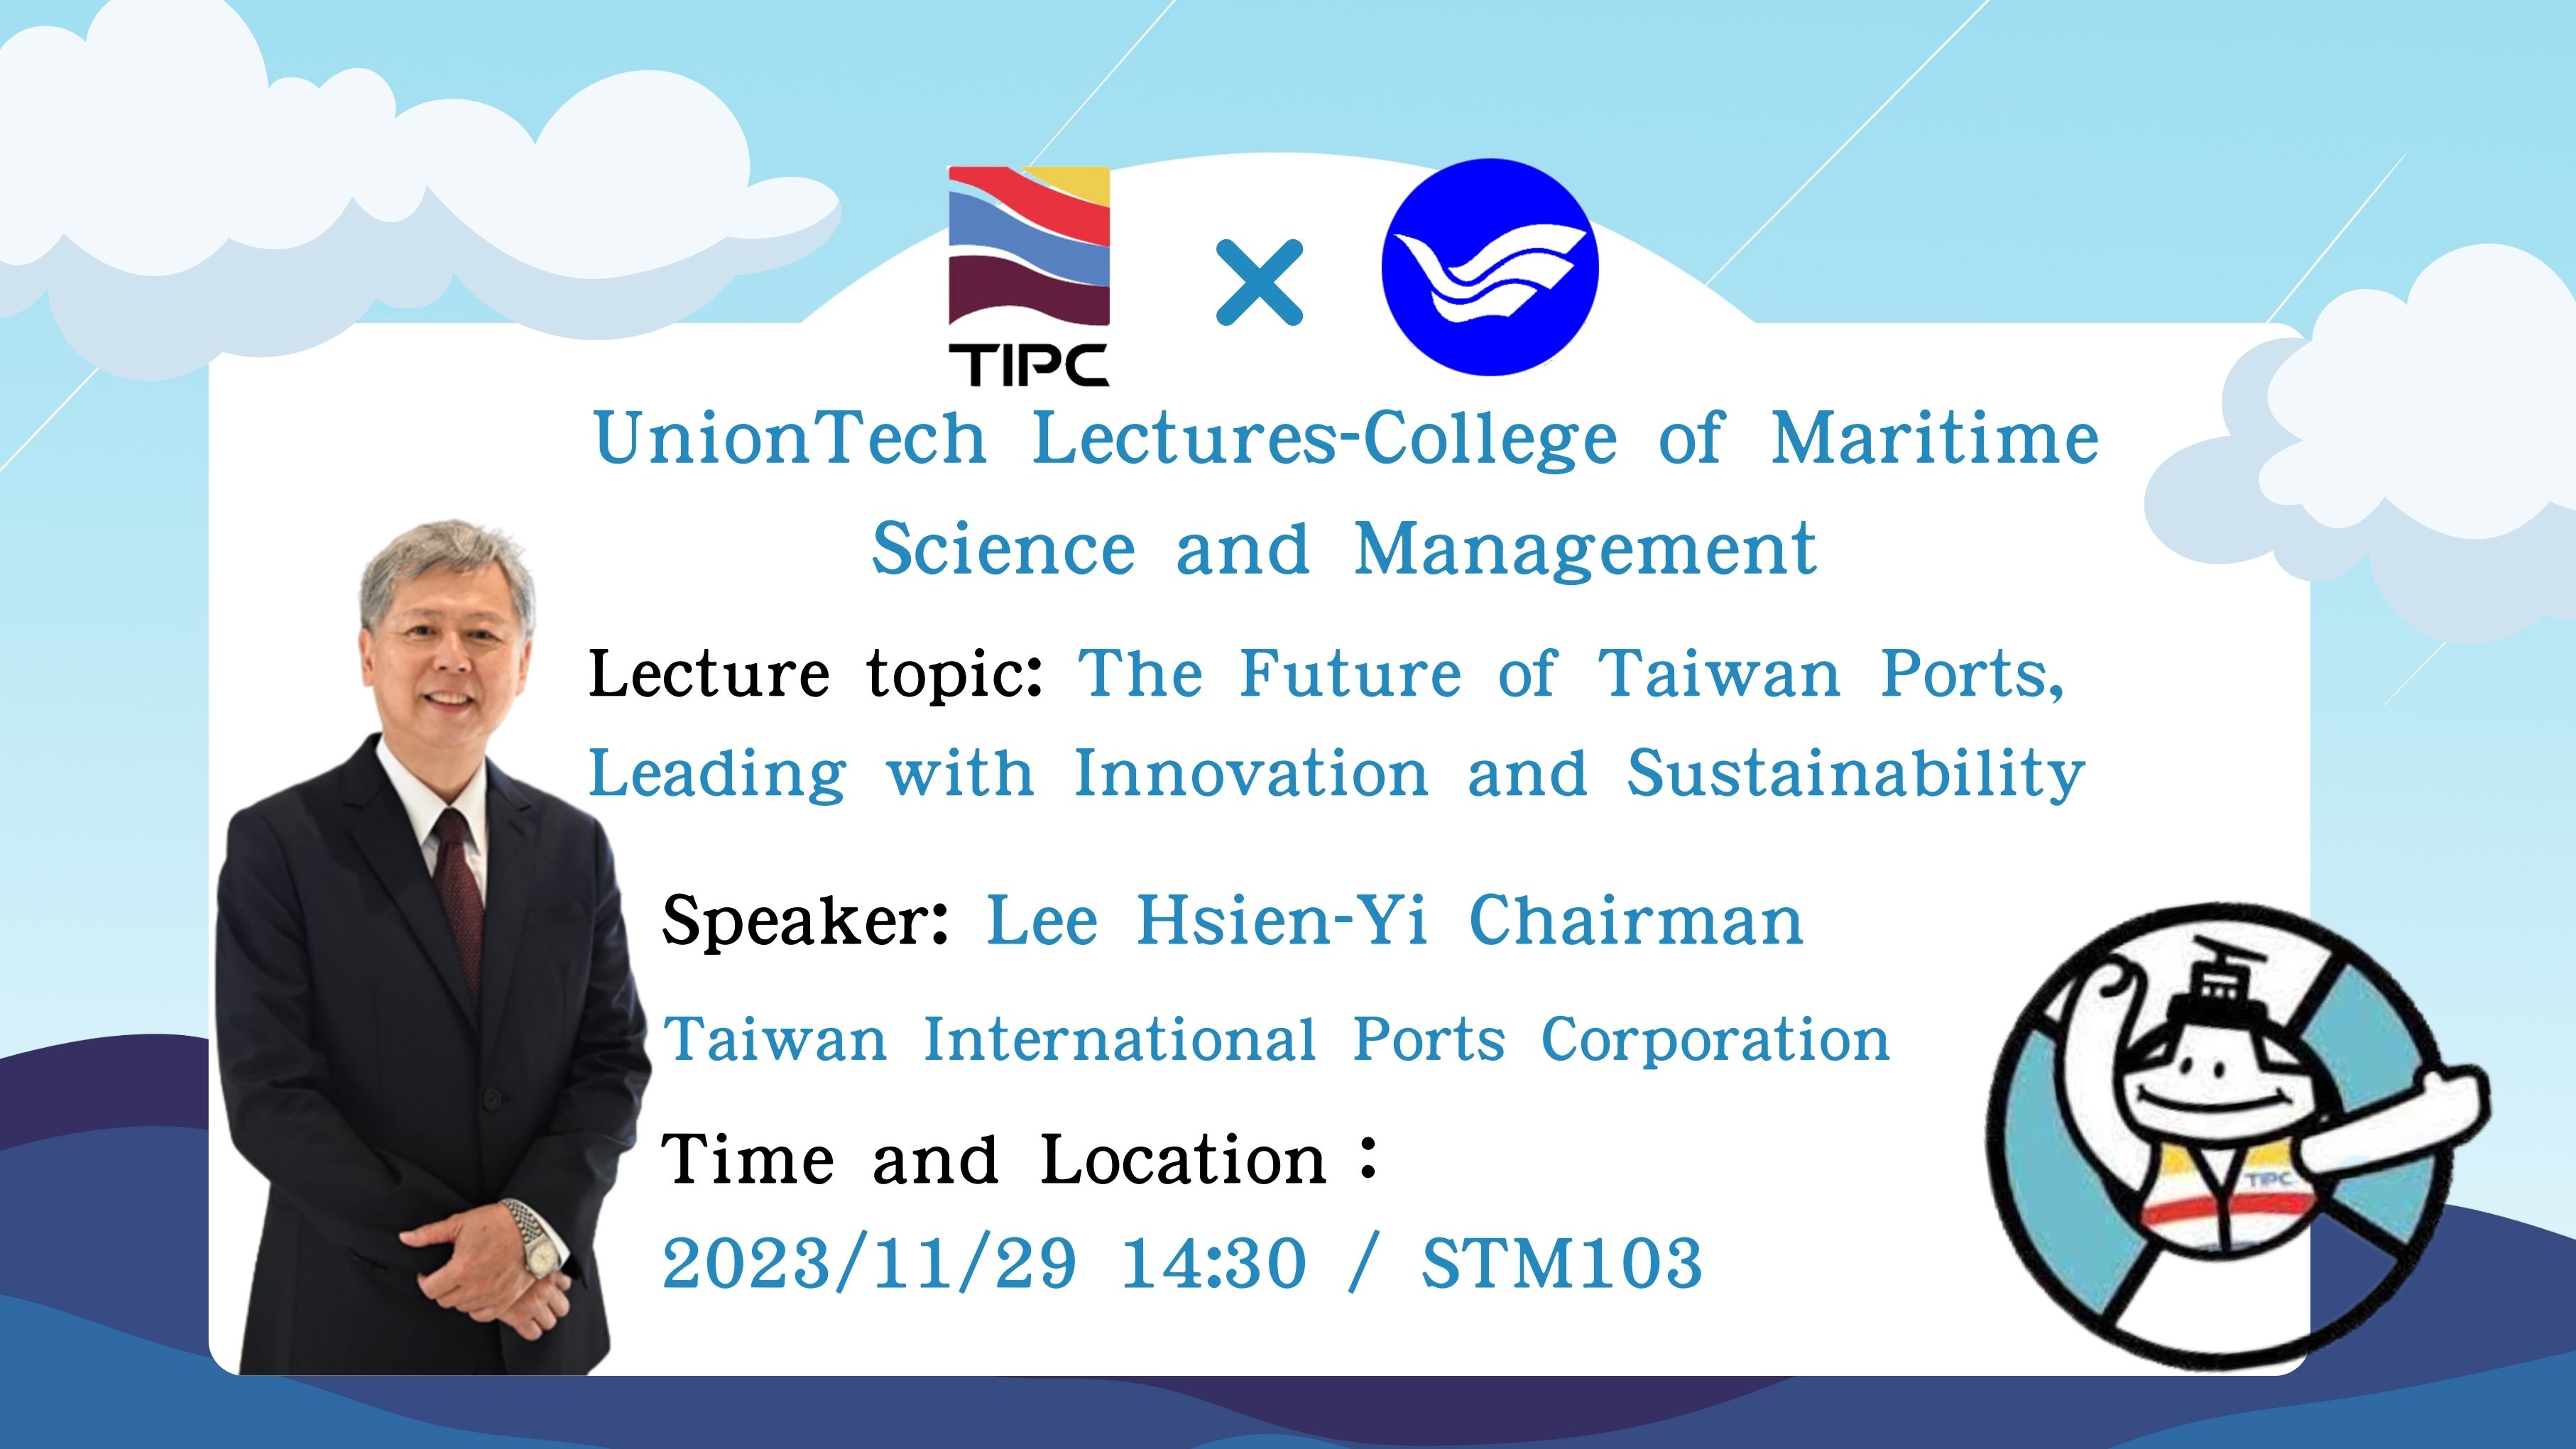 UnionTech Lectures-College of Maritime Science and Management